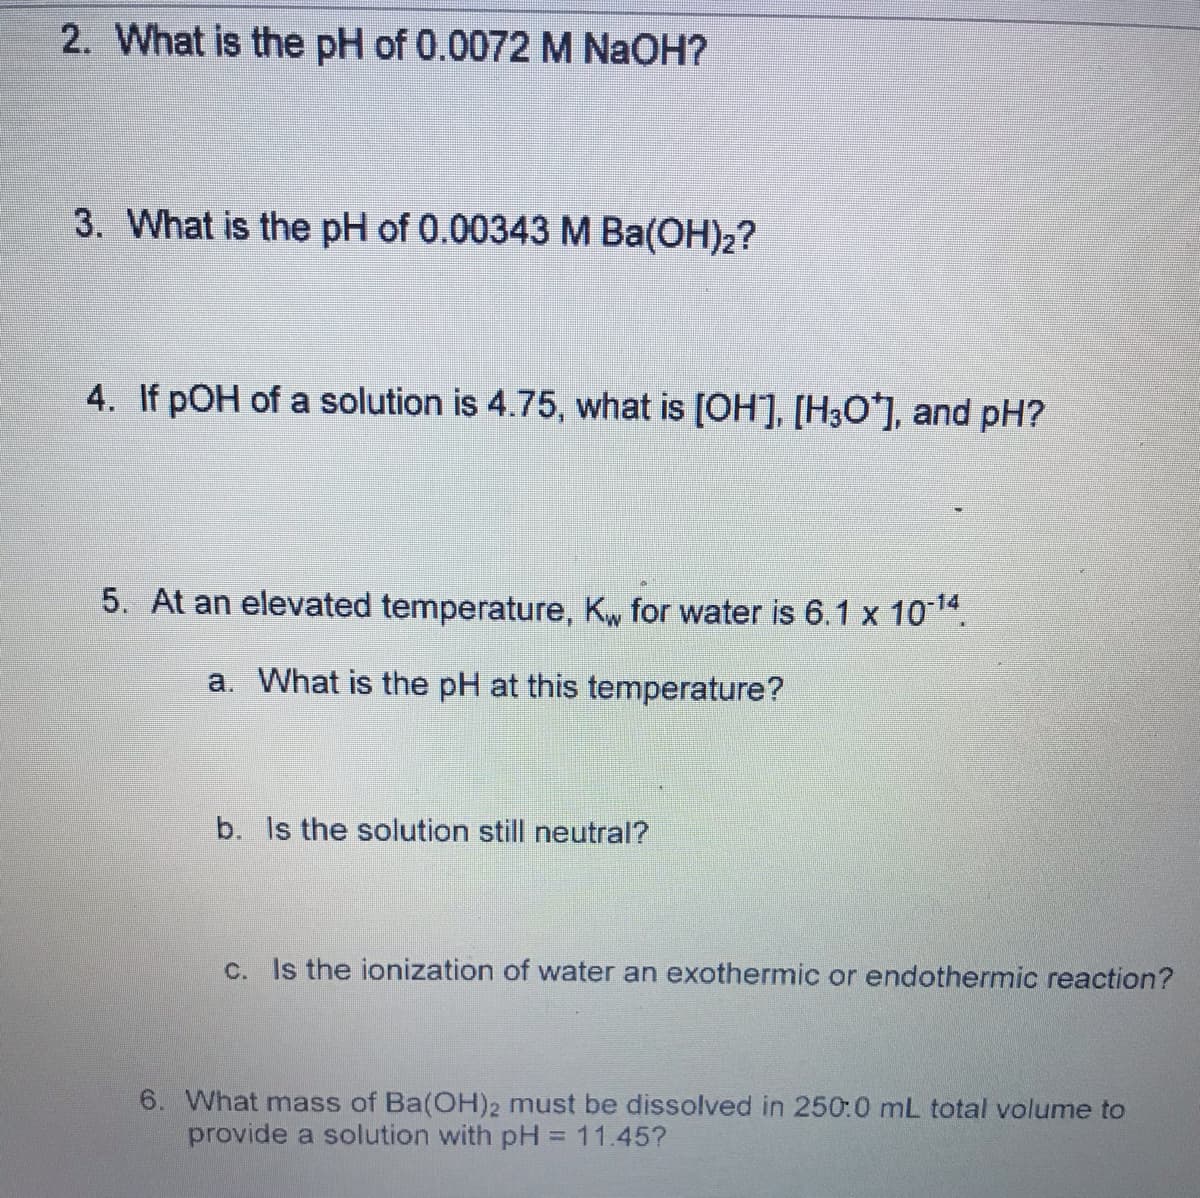 2. What is the pH of 0.0072 M NaOH?
3. What is the pH of 0.00343M Ba(OH)2?
4. If pOH of a solution is 4.75, what is (OH], [H3O*], and pH?
5. At an elevated temperature, Kw for water is 6.1 x 1014.
a. What is the pH at this temperature?
b. Is the solution still neutral?
c. Is the ionization of water an exothermic or endothermic reaction?
6. What mass of Ba(OH)2 must be dissolved in 250:0 mL total volume to
provide a solution with pH = 11.45?
